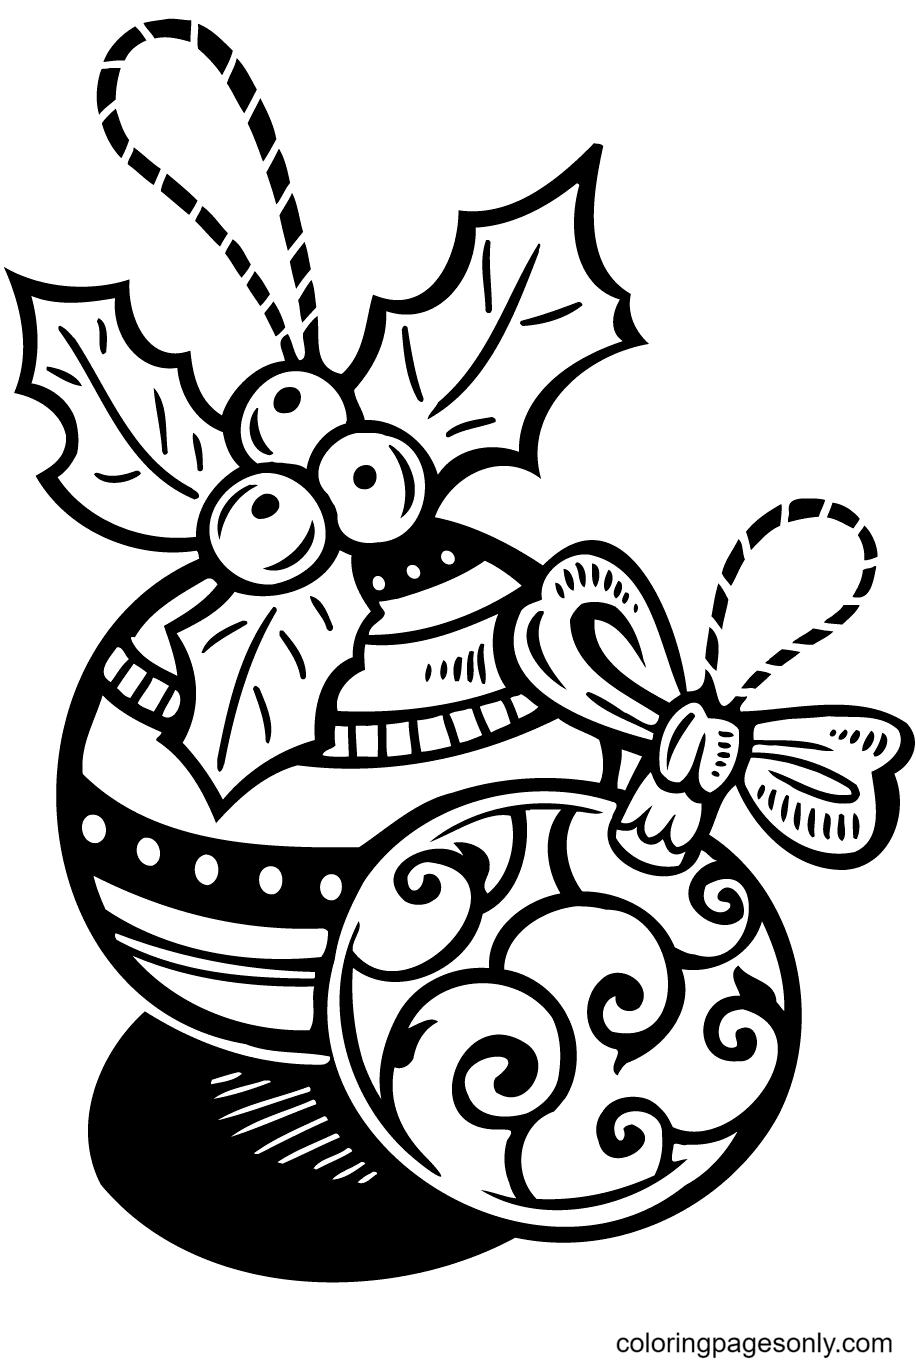 Christmas Ball Decorations Free Coloring Page